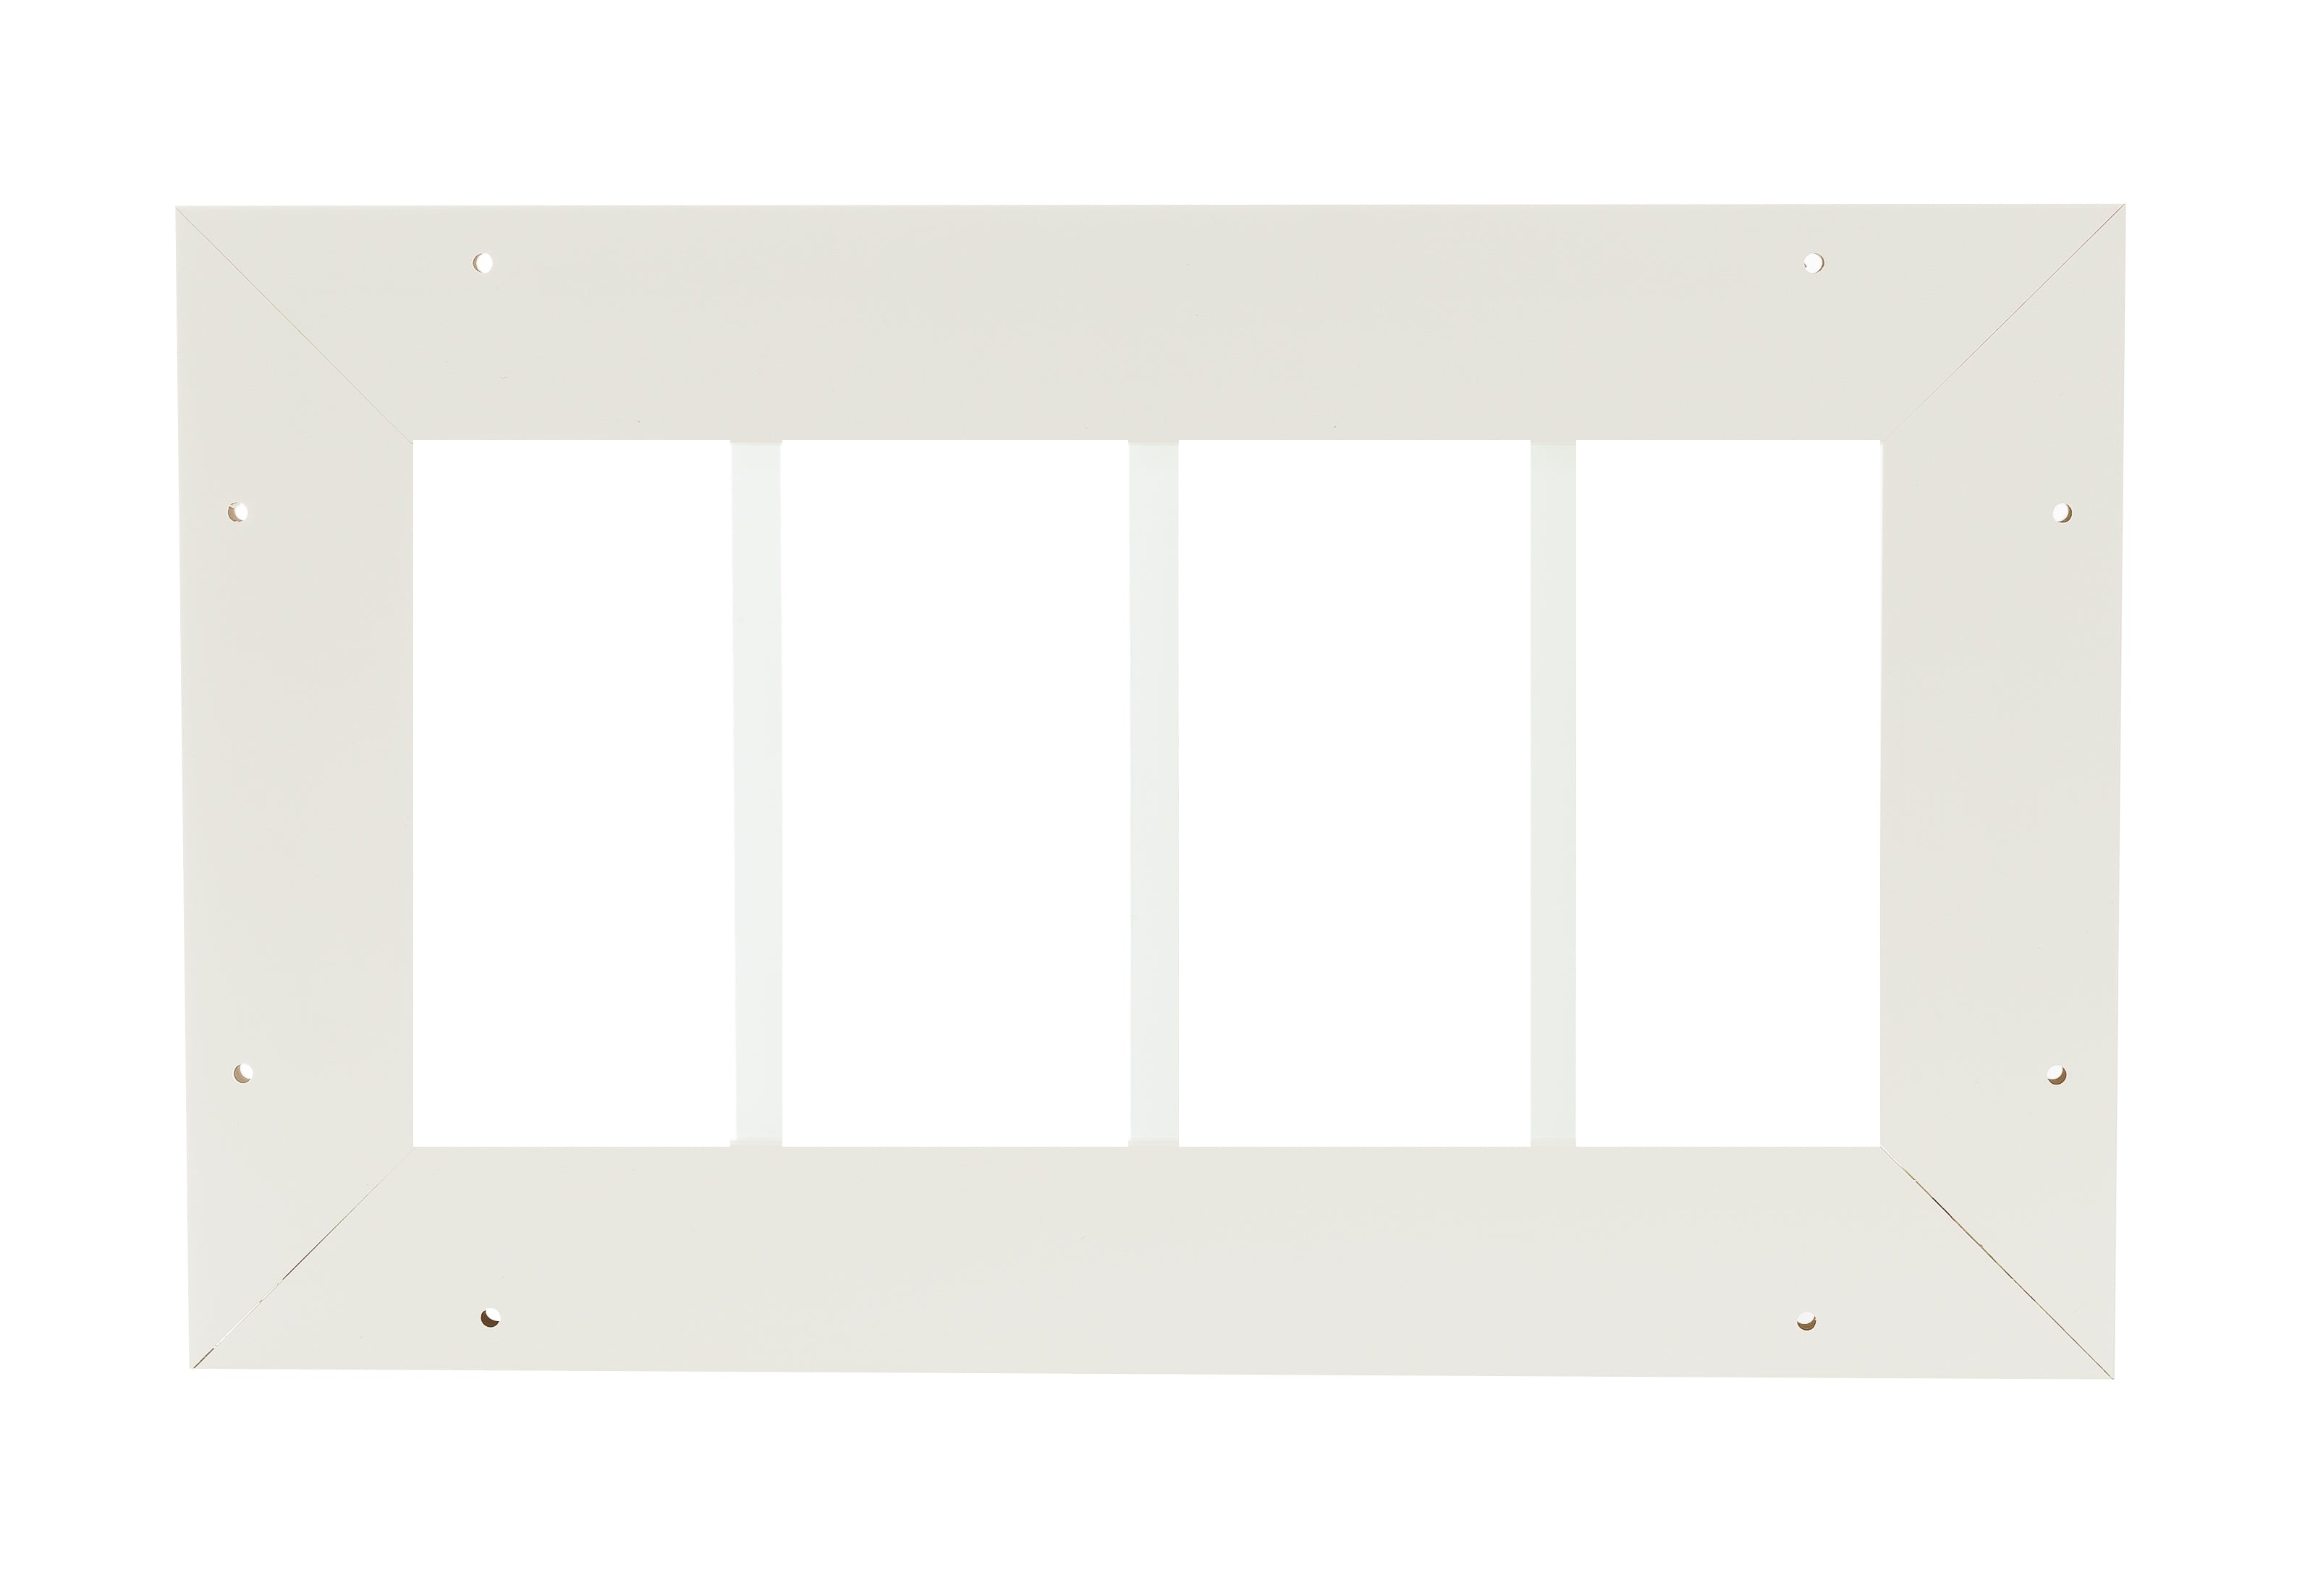 10.185" X 18" Transom Flush Mount PVC White Window for Sheds, Playhouses, and MORE 